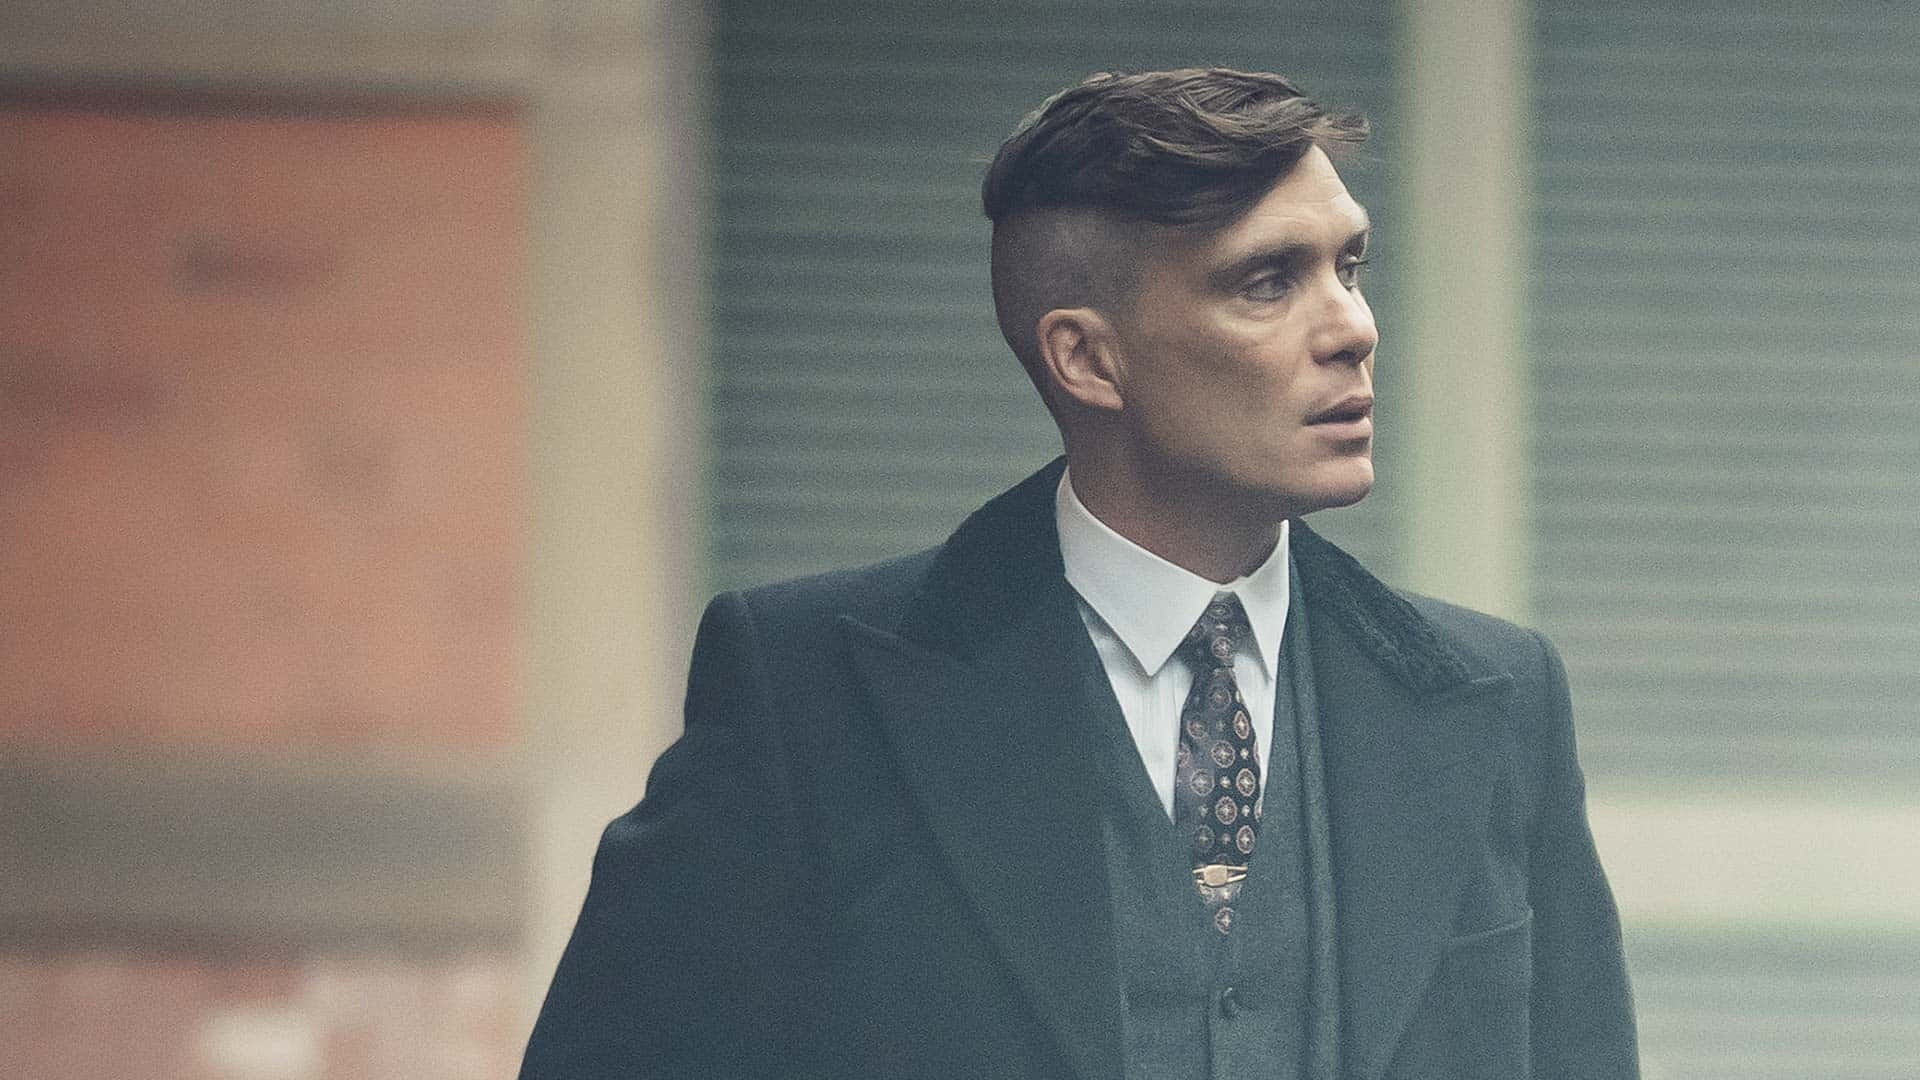 Thomas Shelby and the Peaky Blinders on a mission